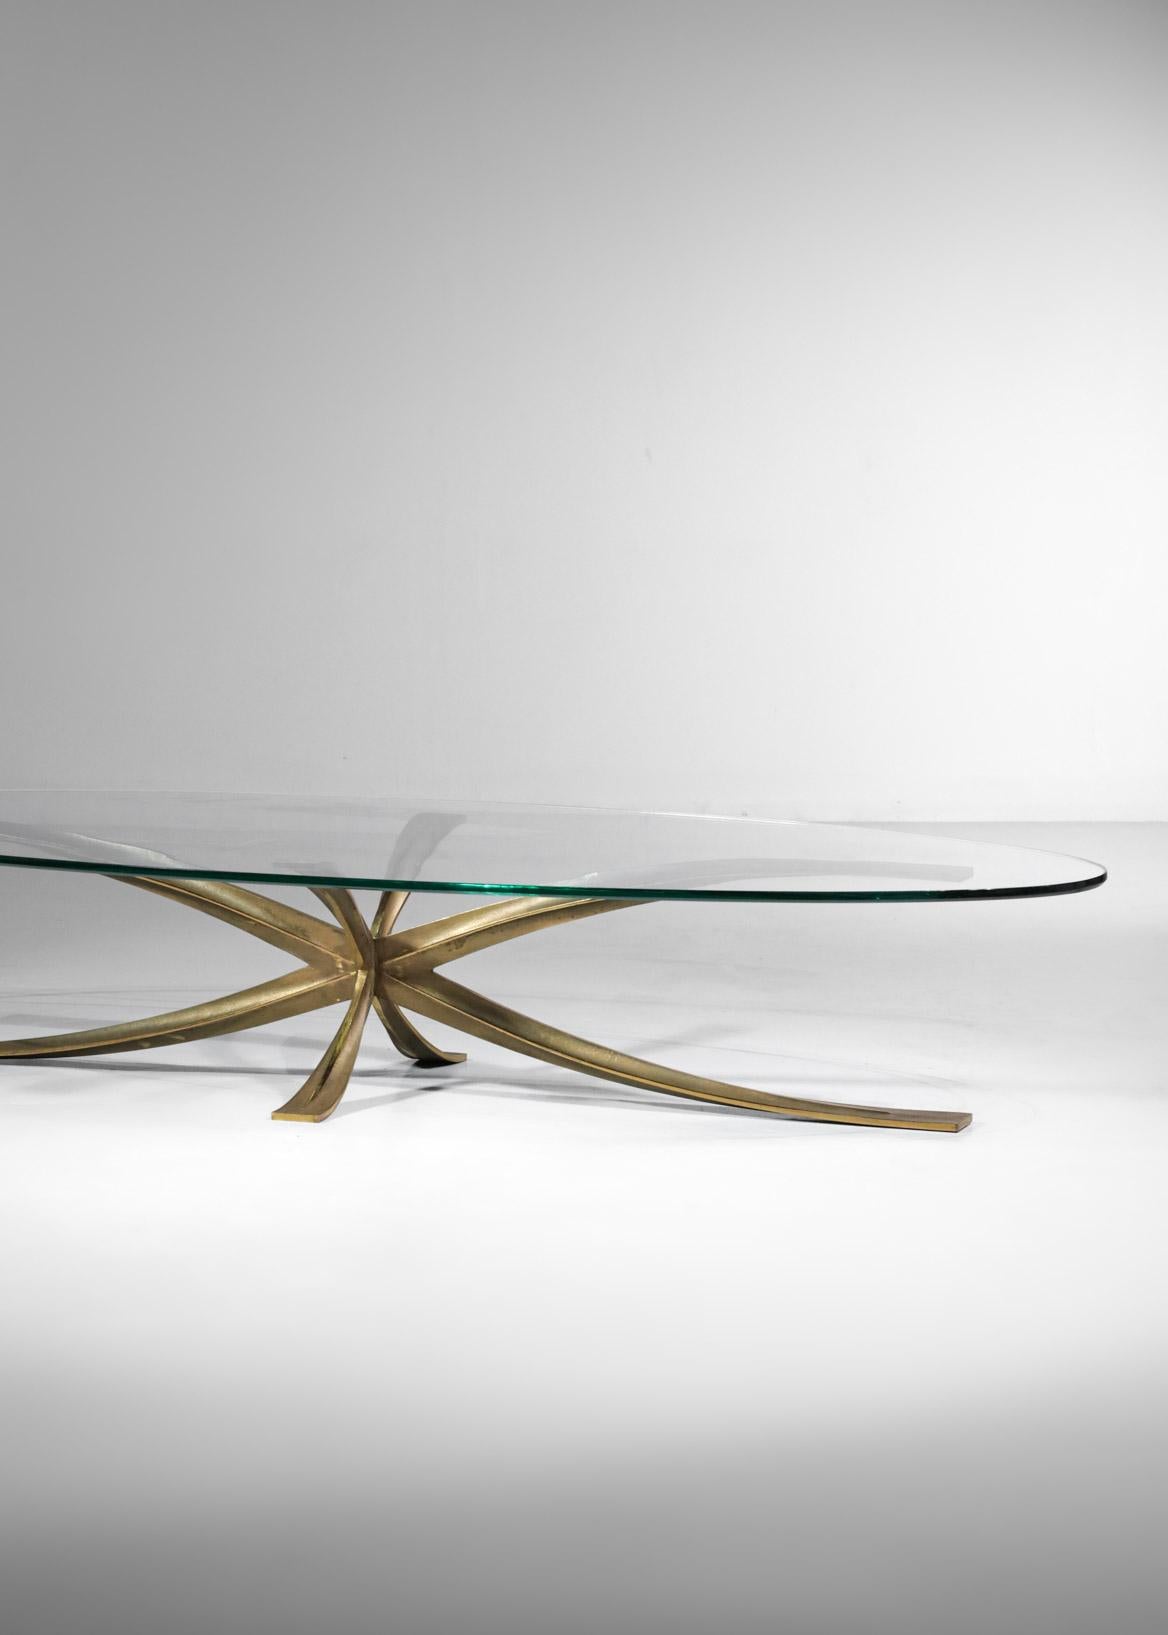 Large Michel Mangematin Coffee Table in Gilt Bronze and Oval Glass 1960's Design For Sale 5